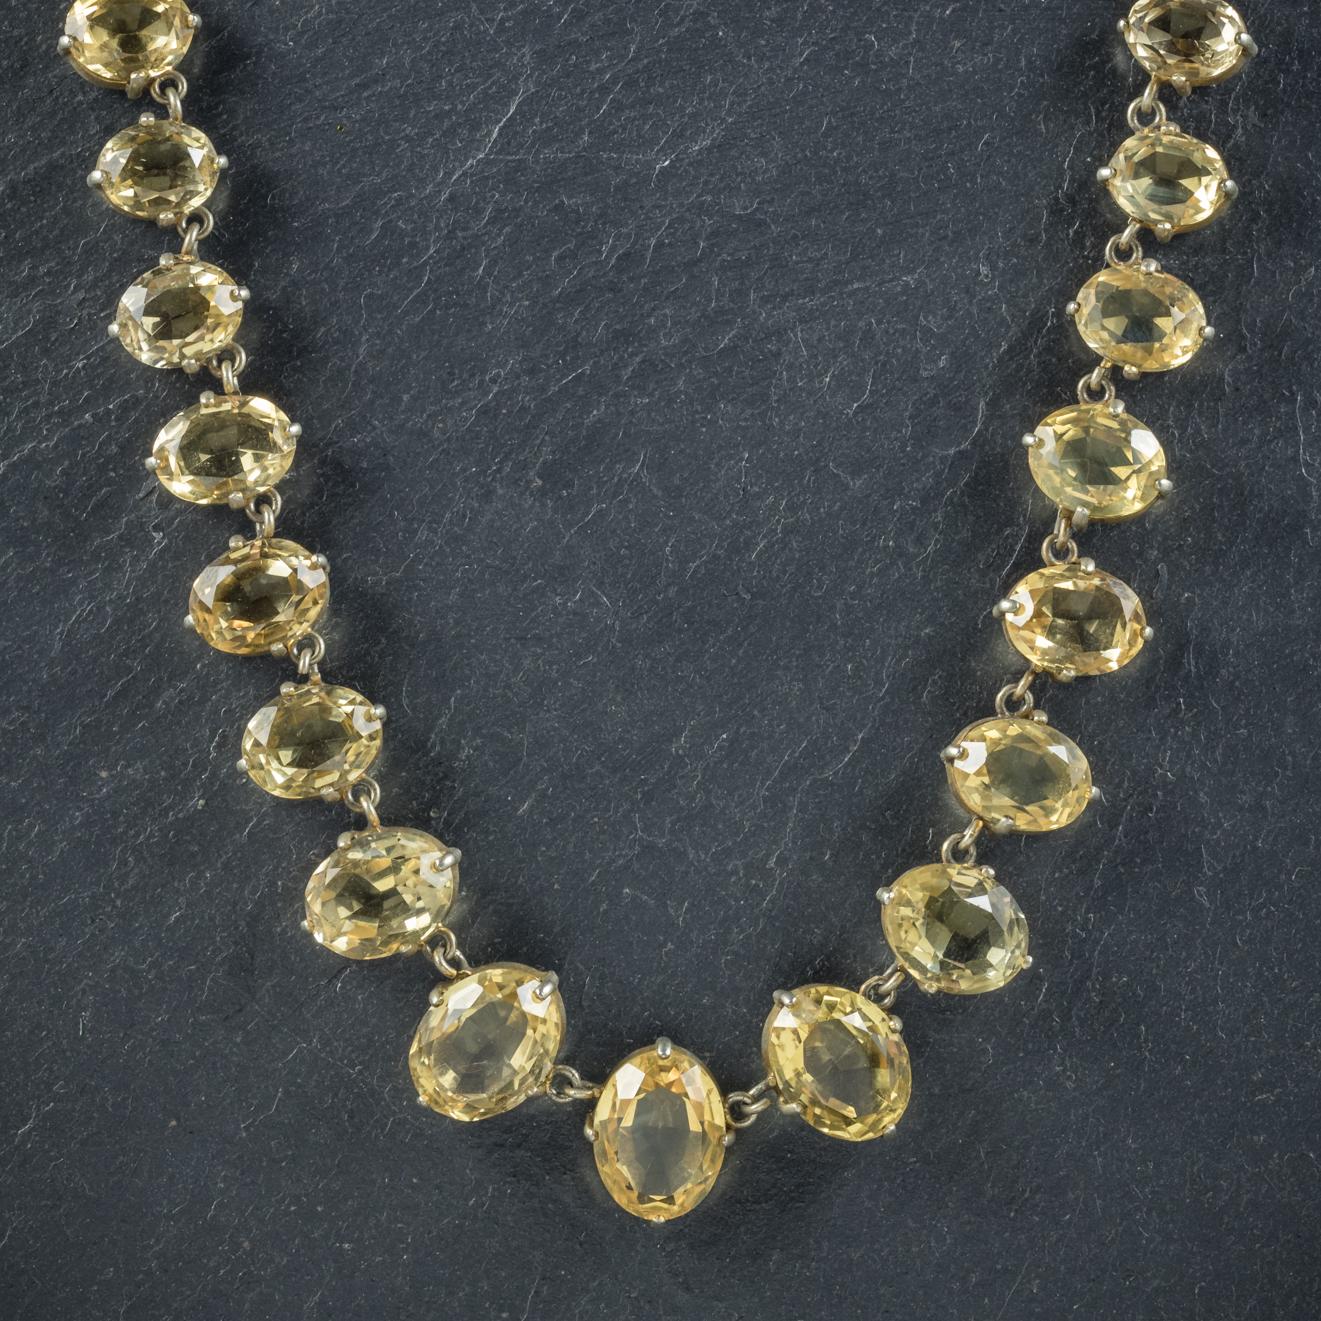 This spectacular antique Citrine Necklace was beautifully made during the Victorian era, Circa 1900. 

The fabulous piece is made up of lovely golden Citrine’s which graduate in size and glow with radiant beauty. 

The necklace is set in Gold Gilt